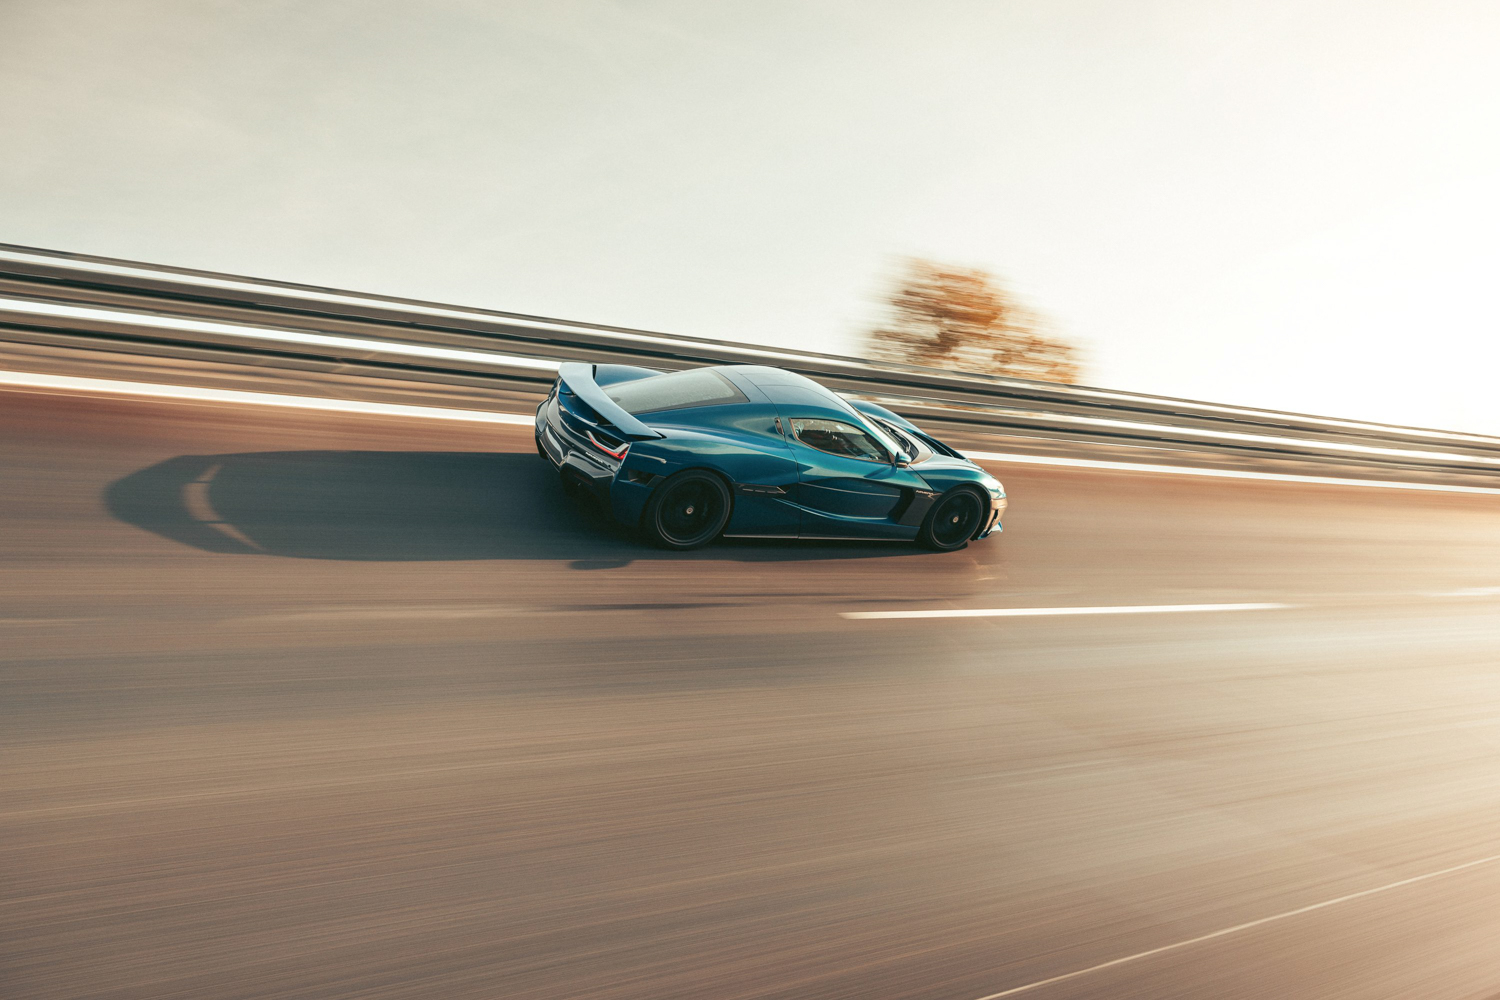 Rimac is now the fastest EV of all